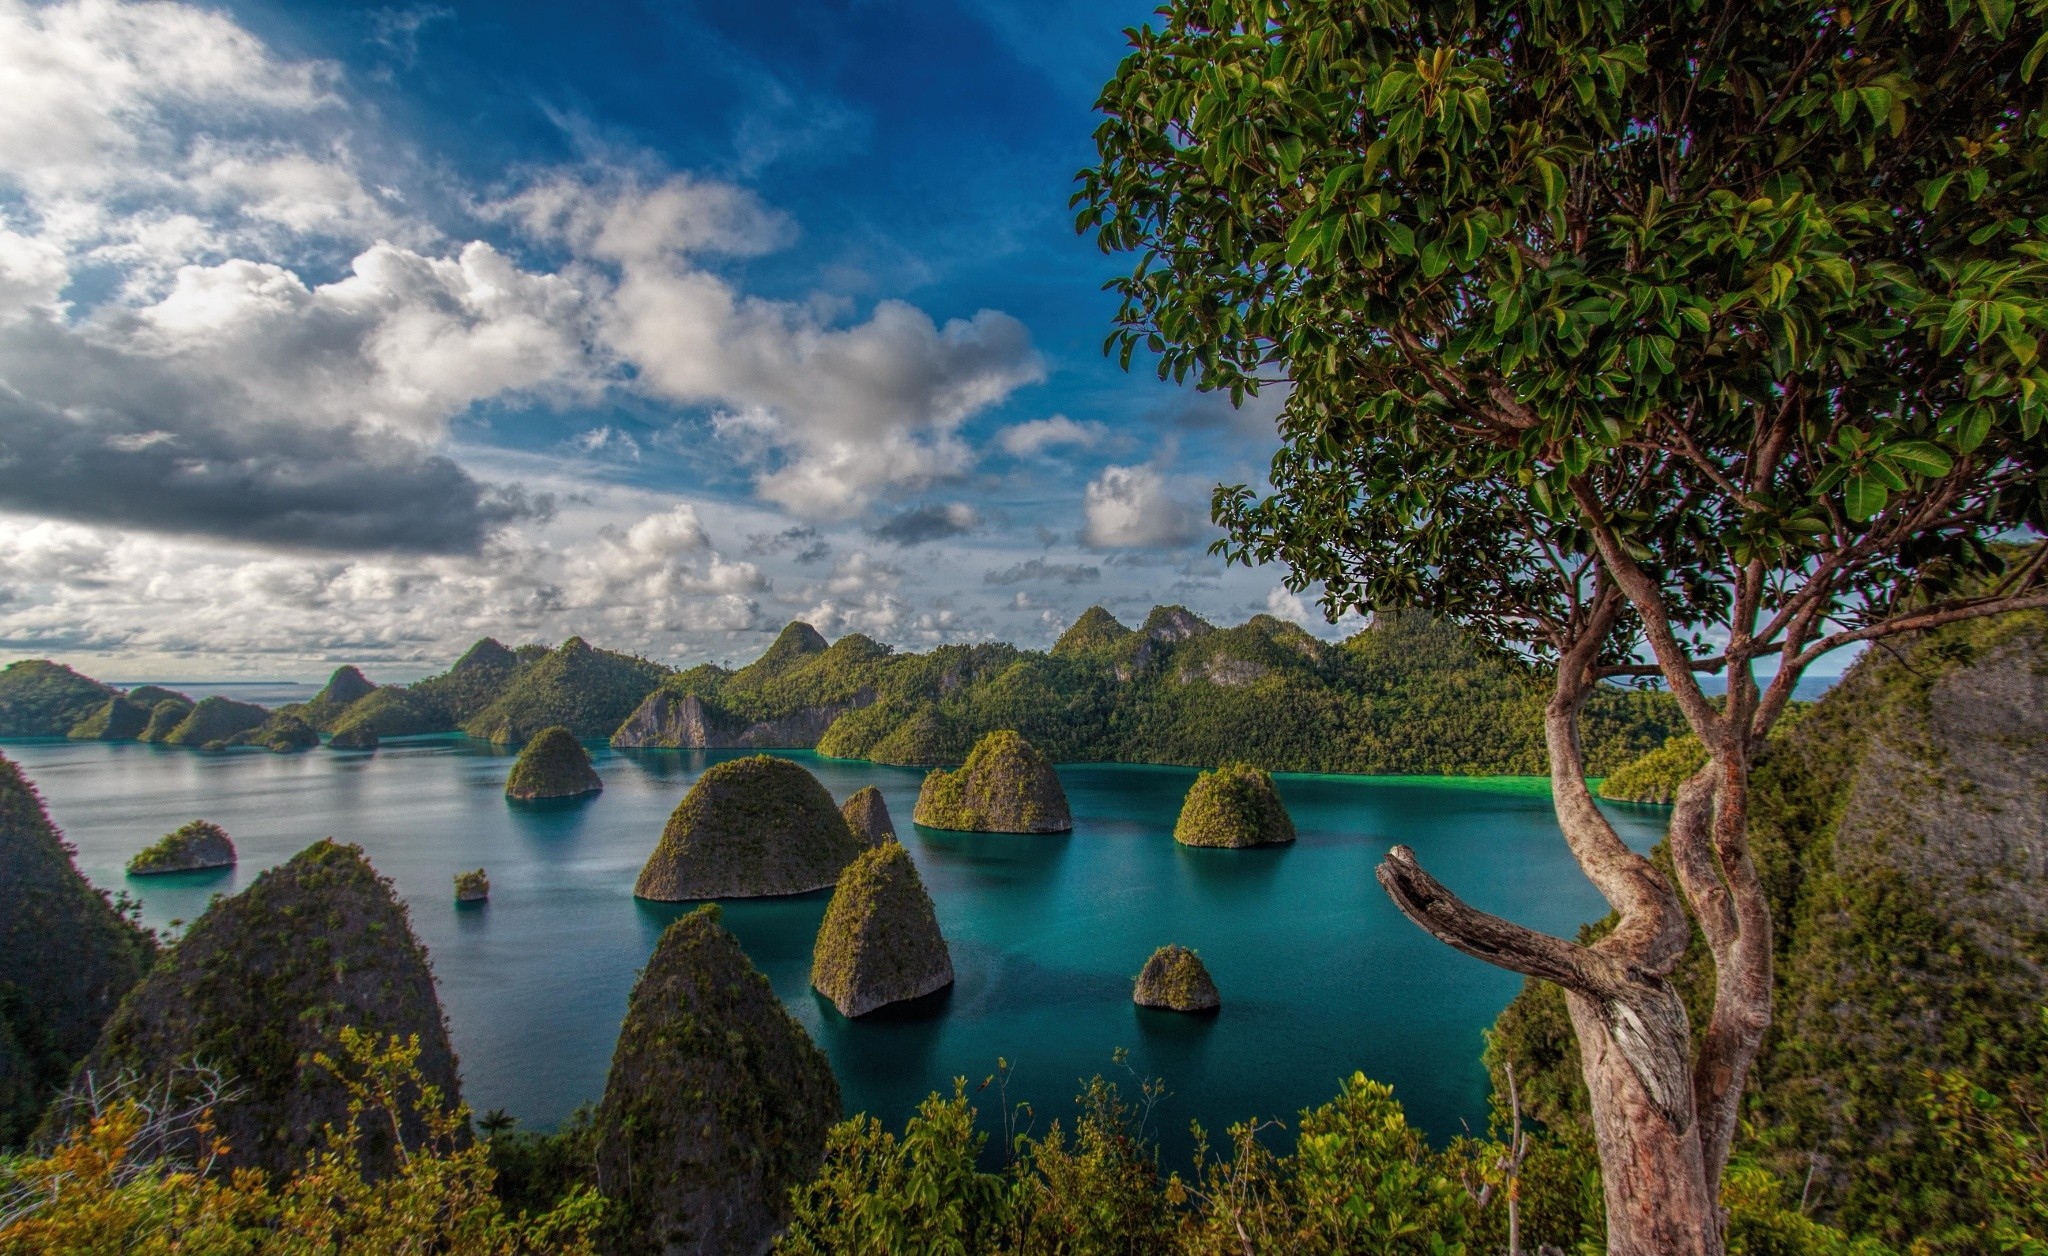 Mountains Clouds Forest Tropical Raja Ampat Indonesia Island Sea Trees Beach Exotic Nature Green Tur 2048x1256